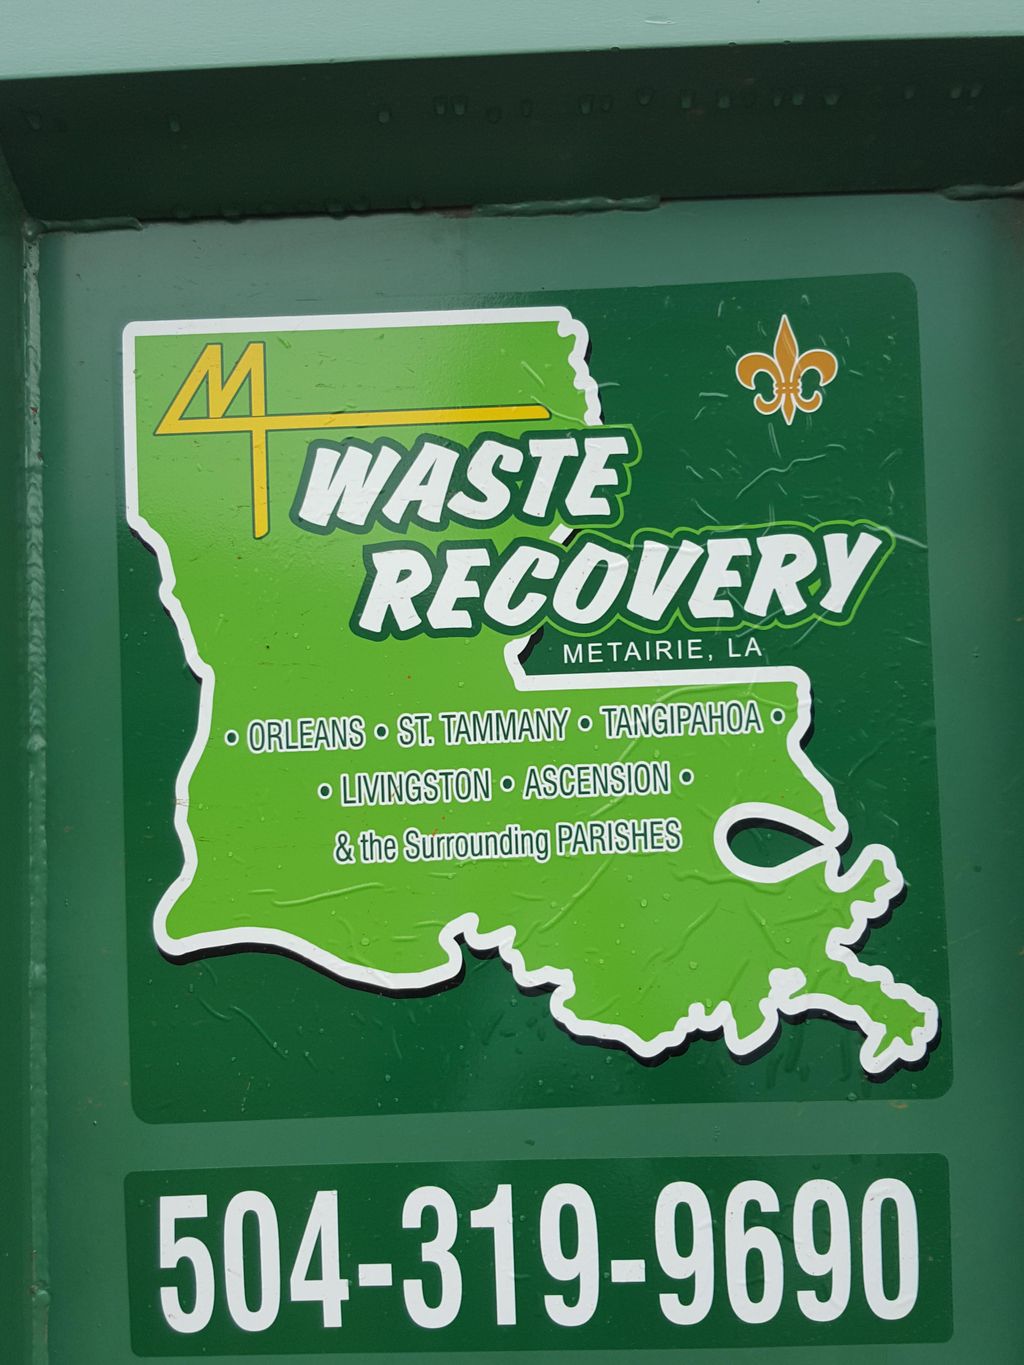 MT. WASTE RECOVERY SERVICE